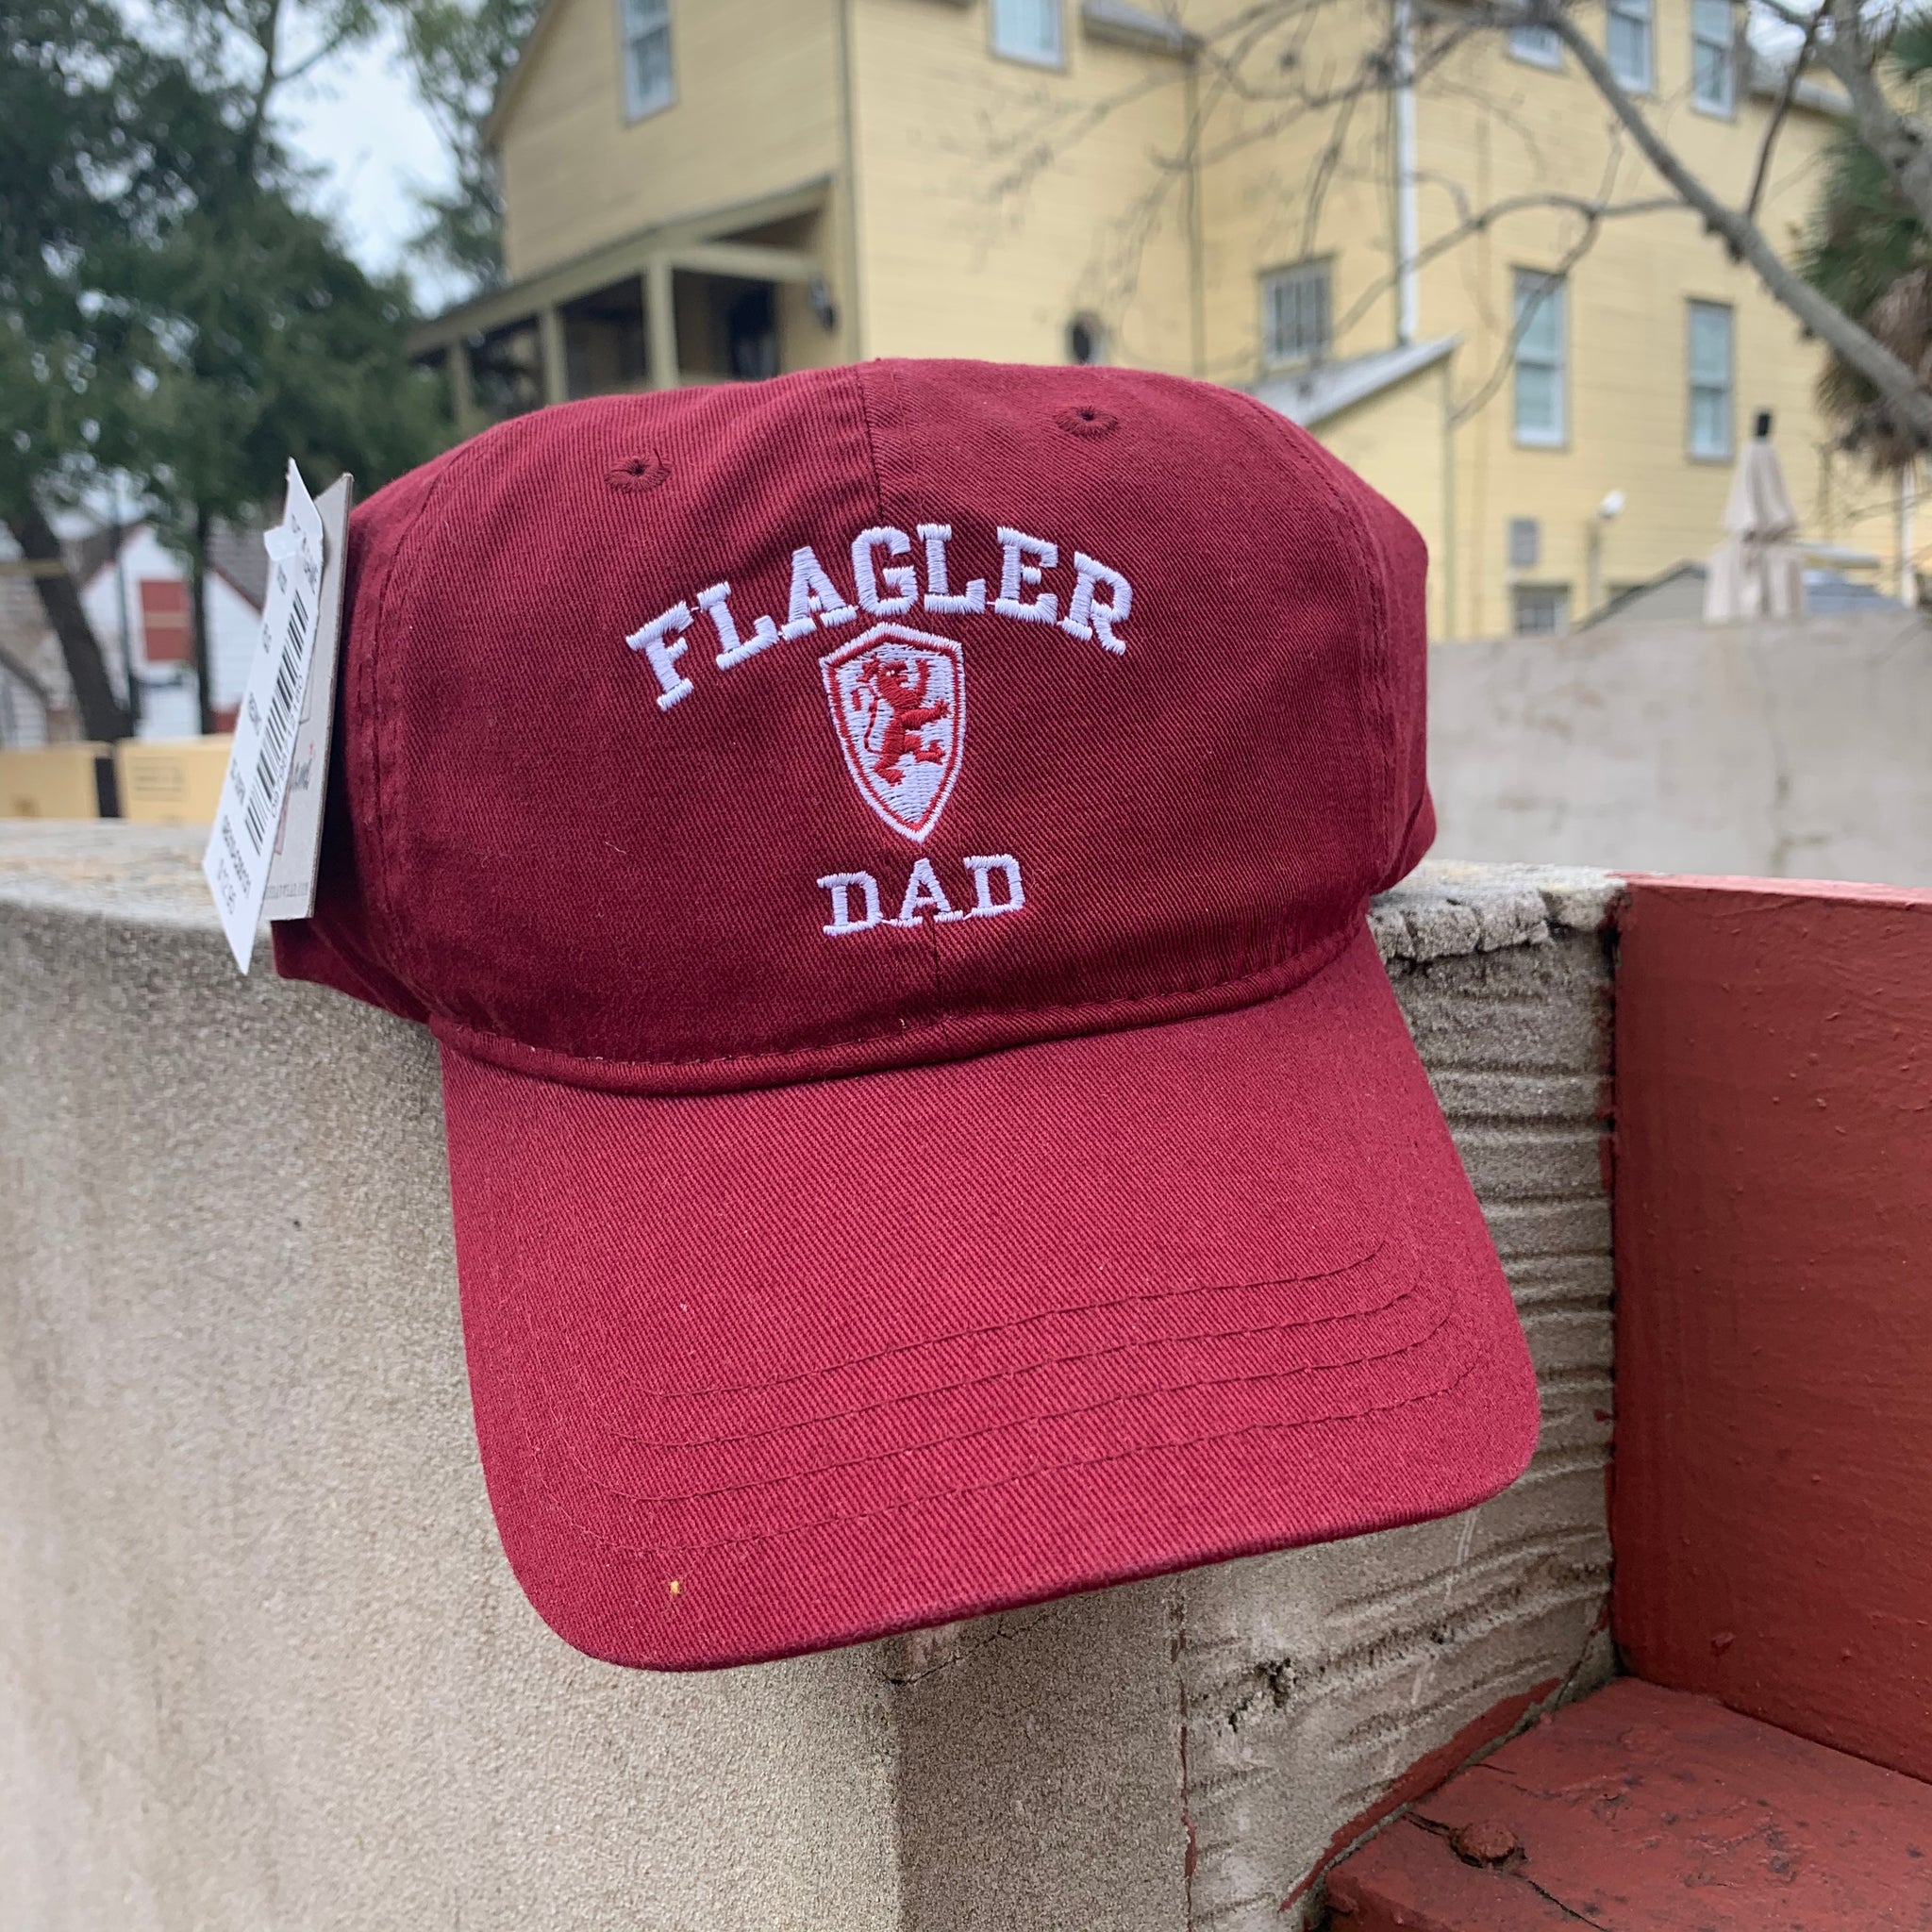 red hat with flagler, a lion shield, and dad embroidered in white in middle 